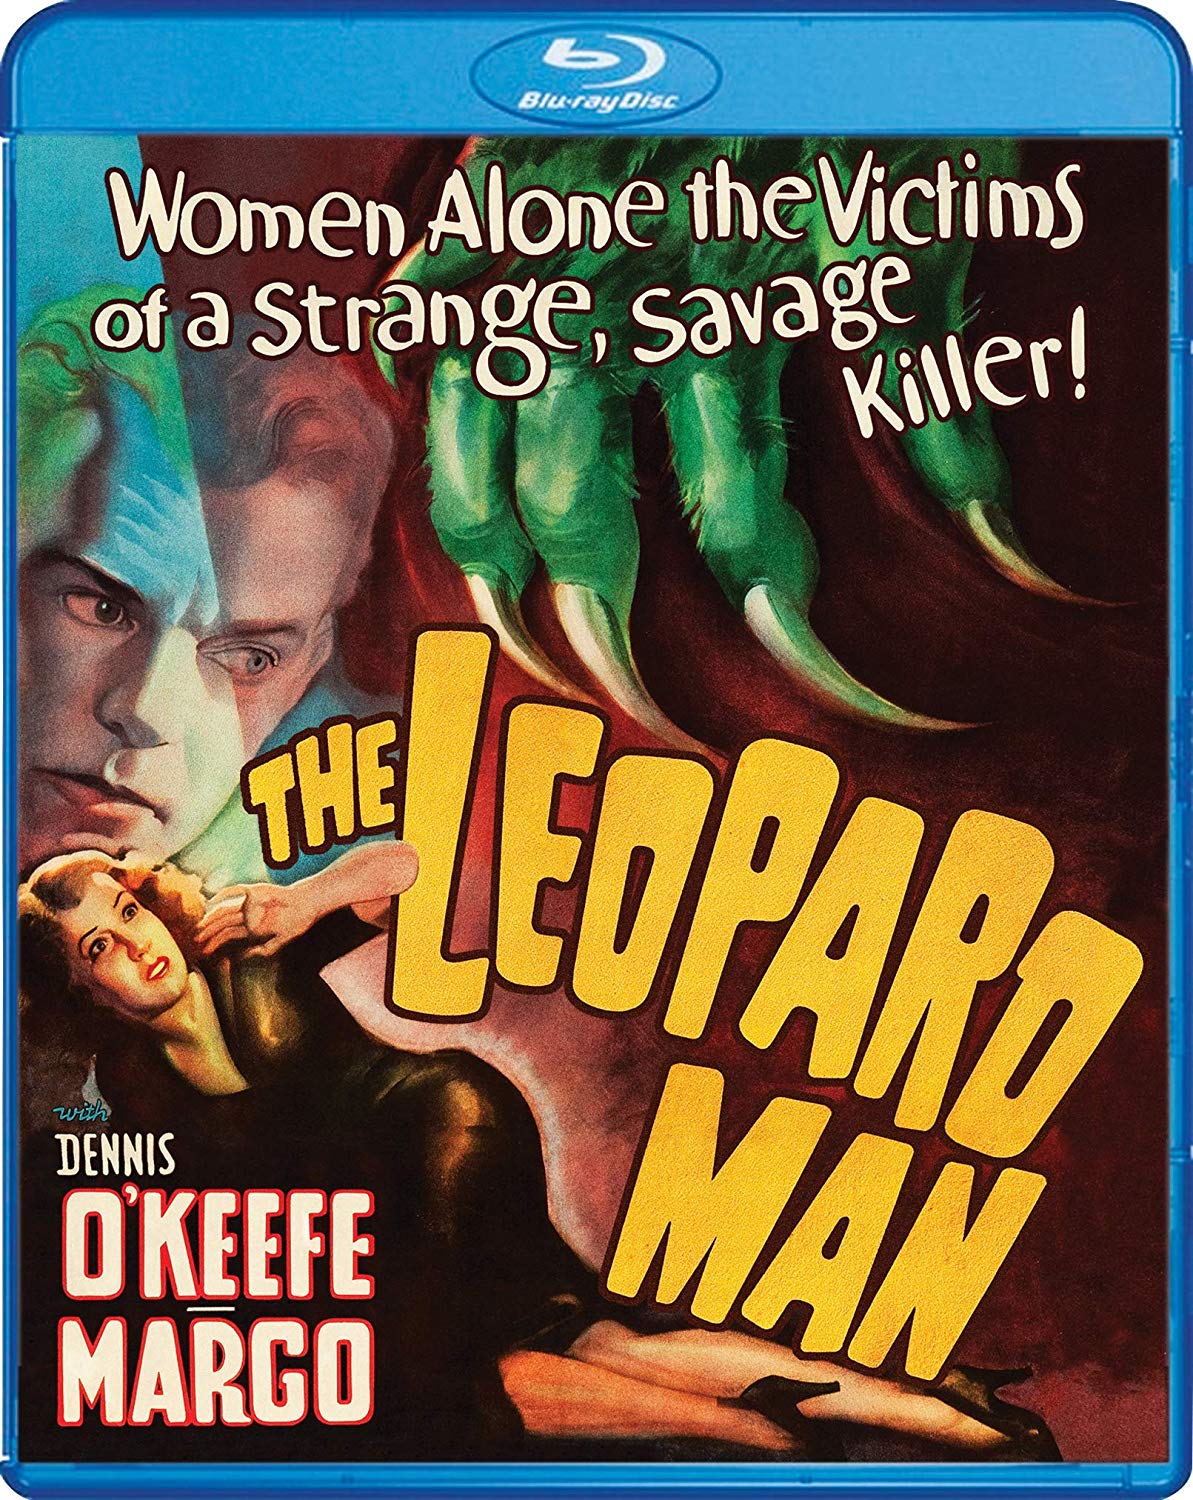 The Leopard Man - women alone the victims of a strange, savage killer - Dennis O'Keefe, Margo